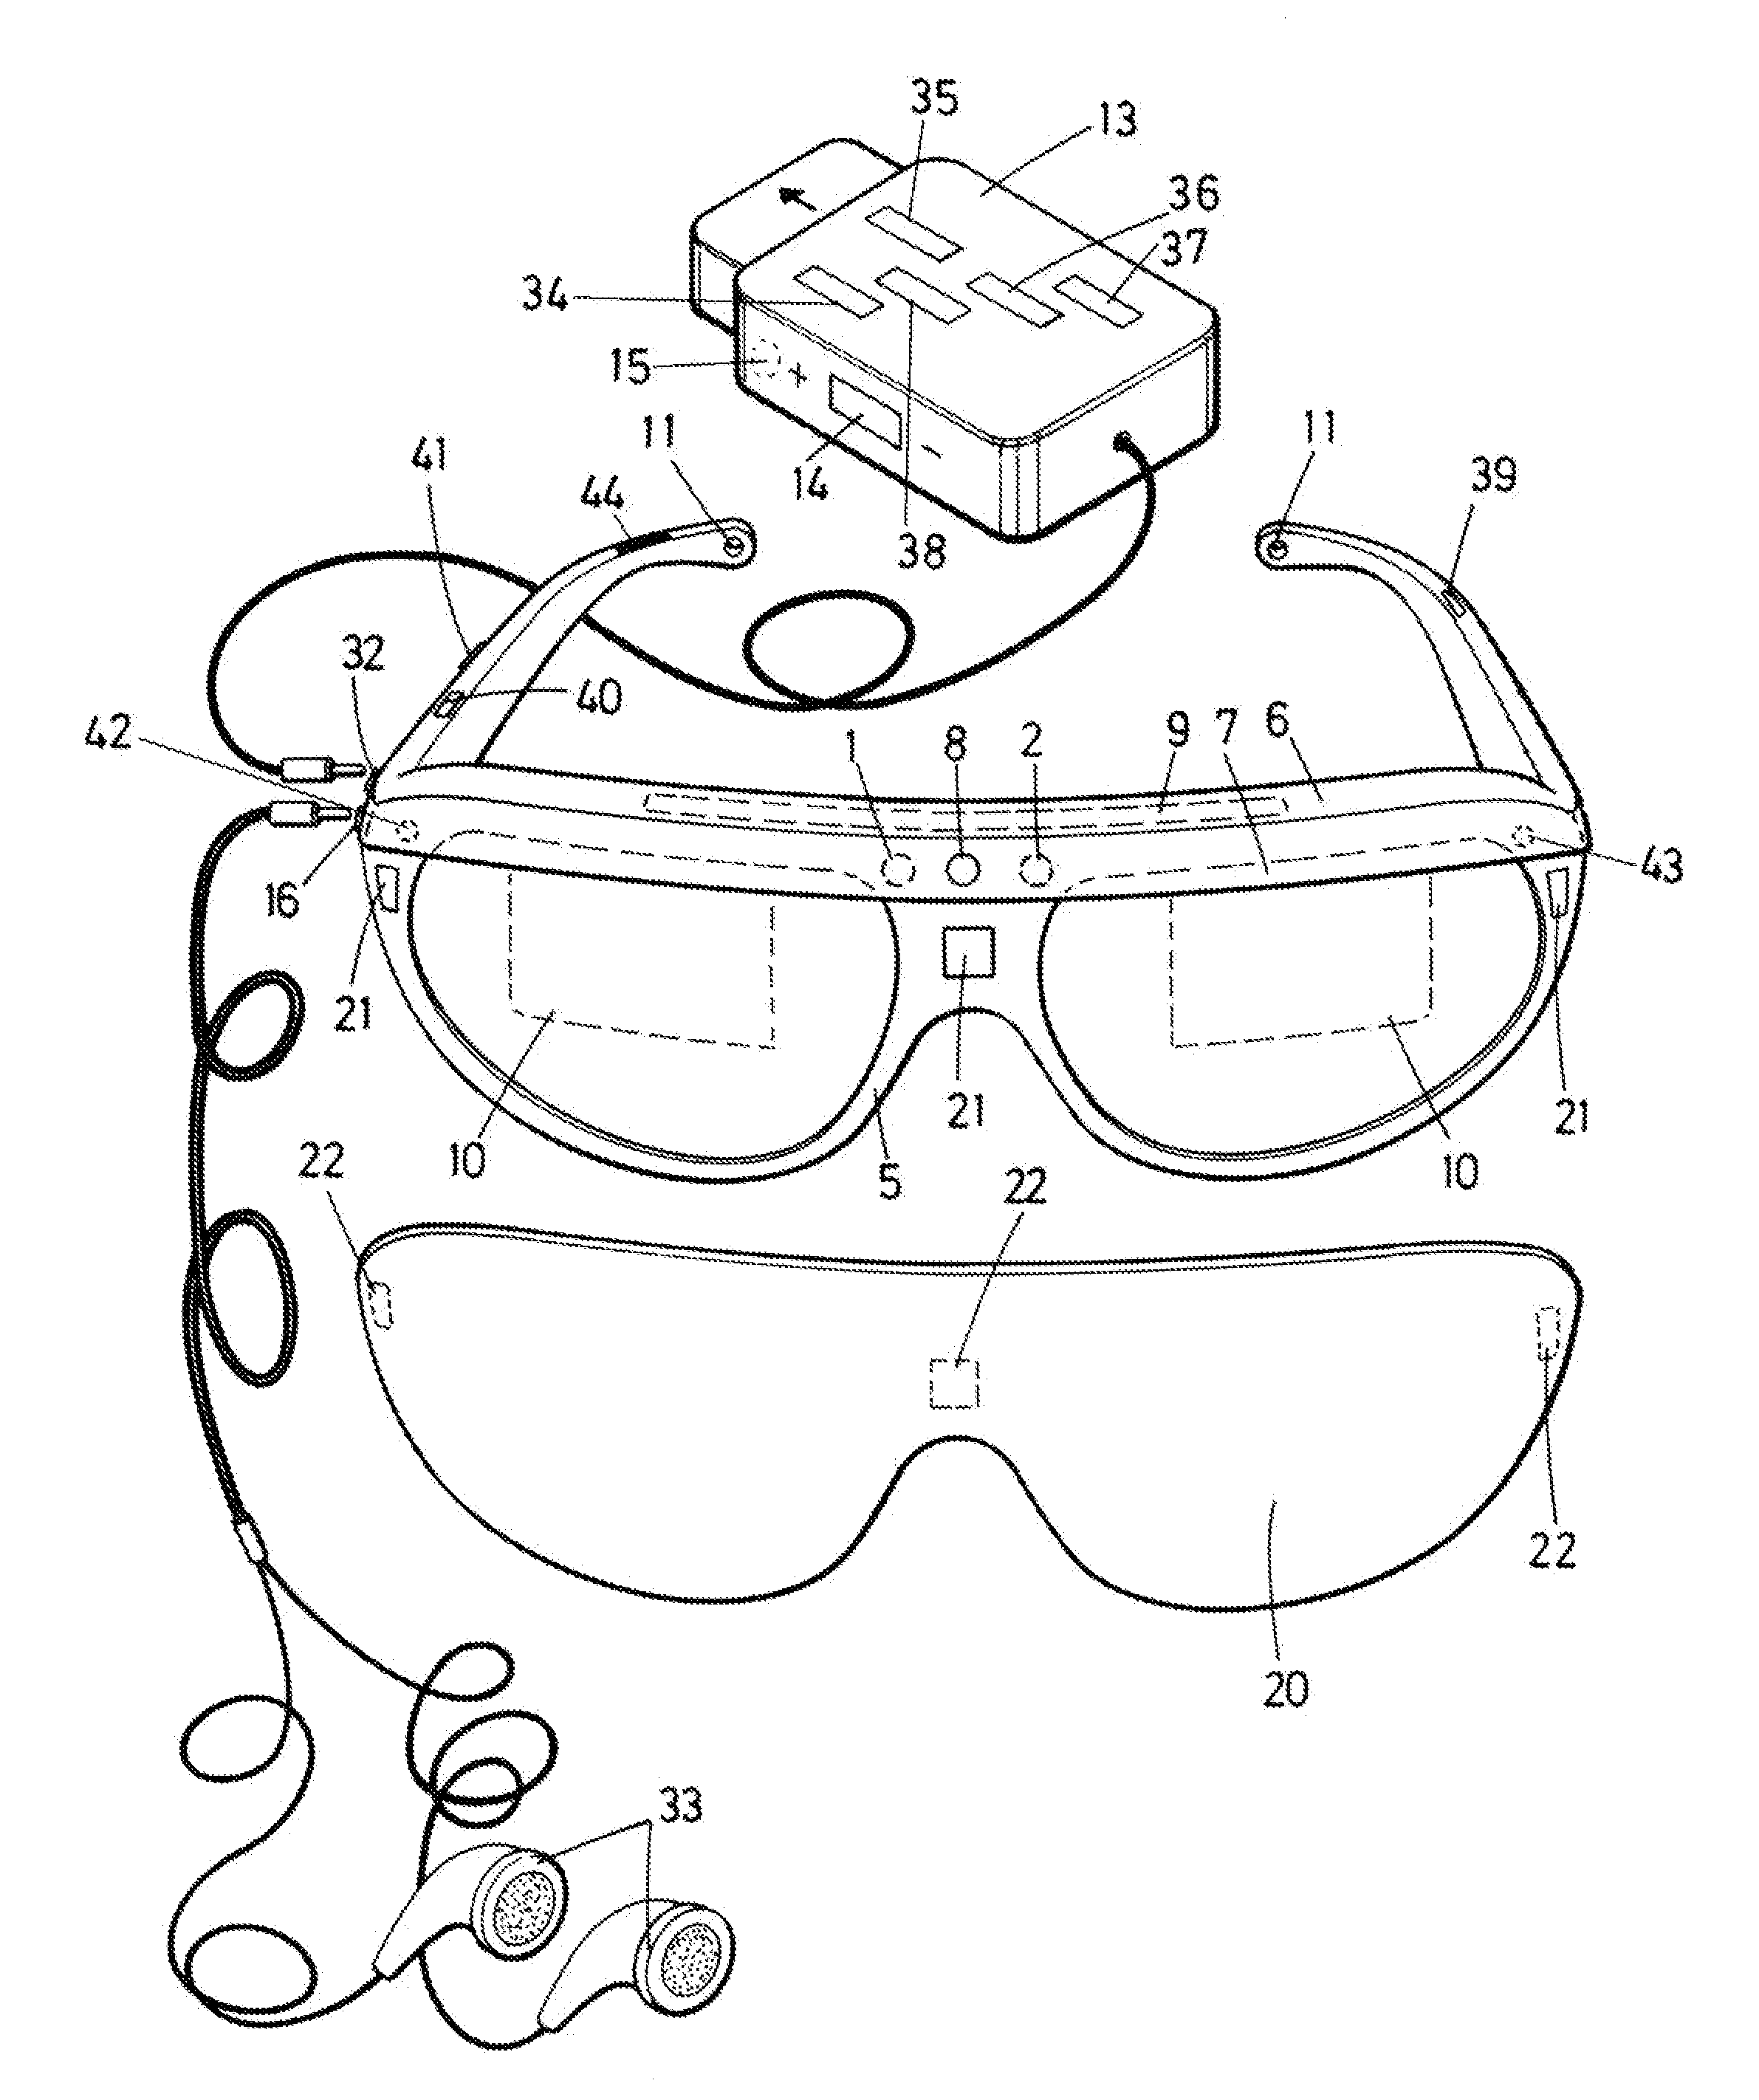 Enhanced-reality electronic device for low-vision pathologies, and implant procedure